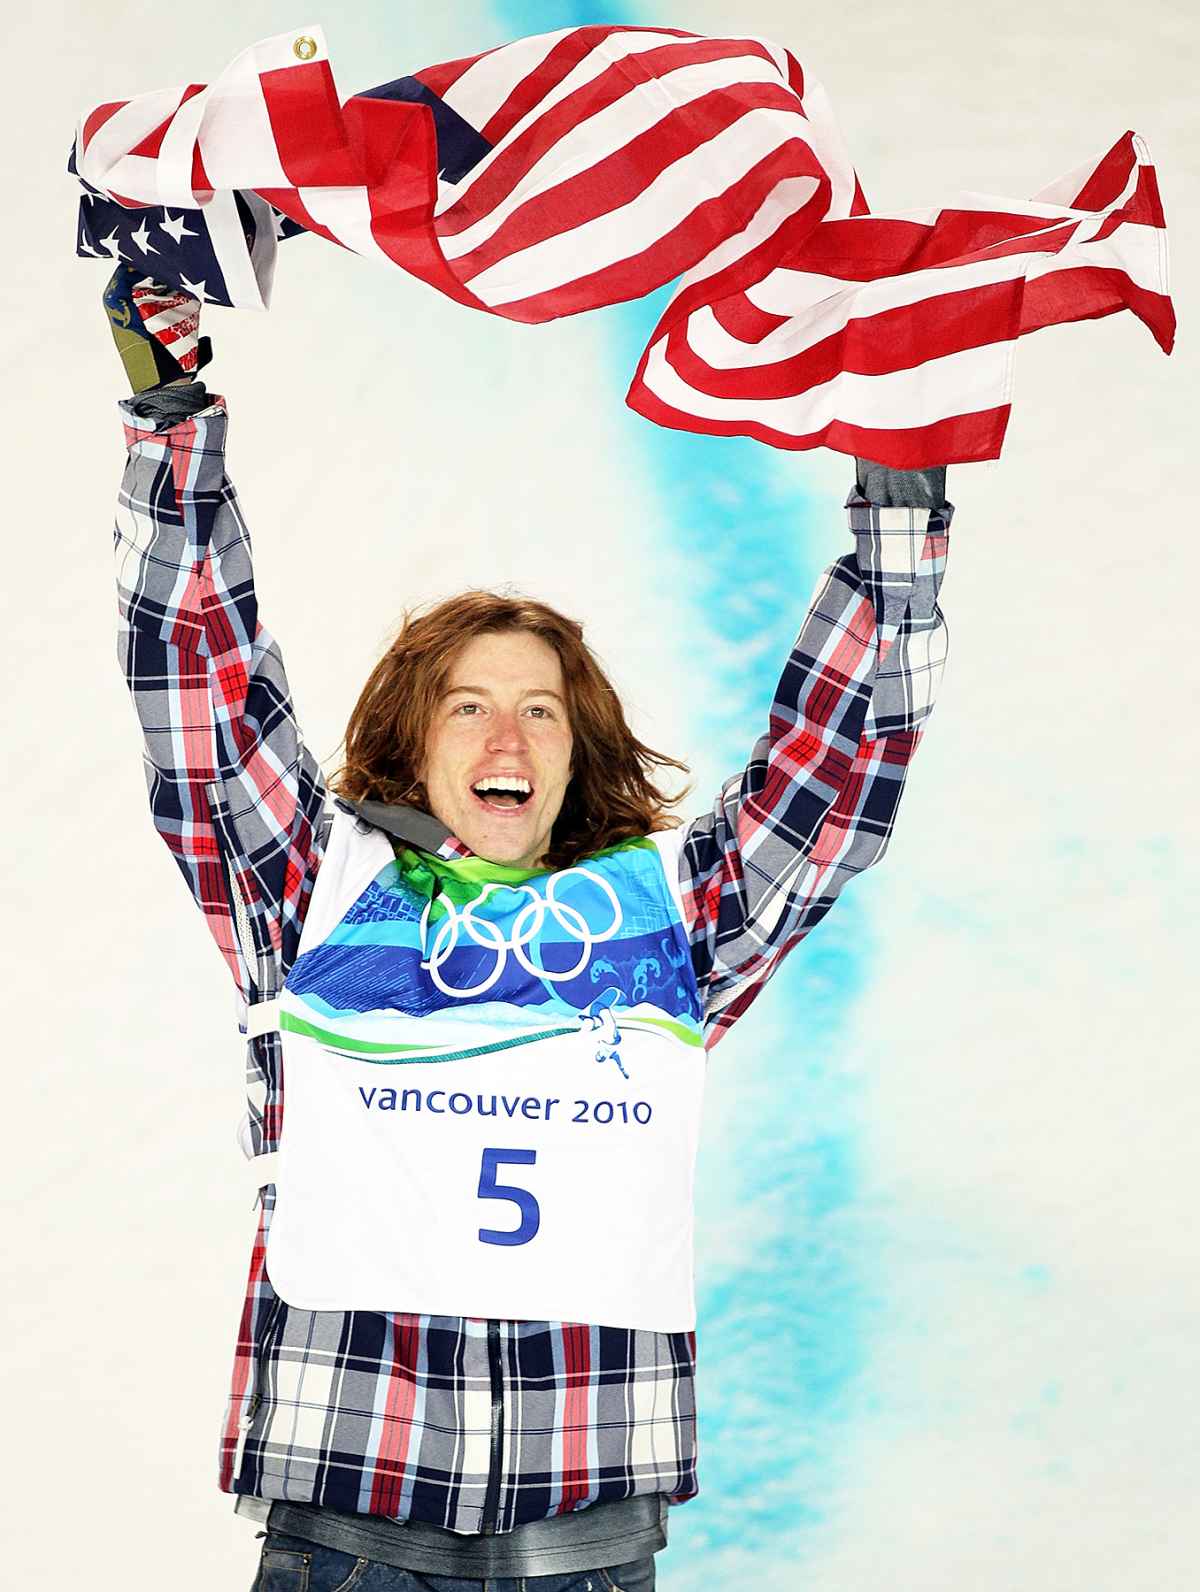 Shaun White: 25 Things You Don't Know About Me